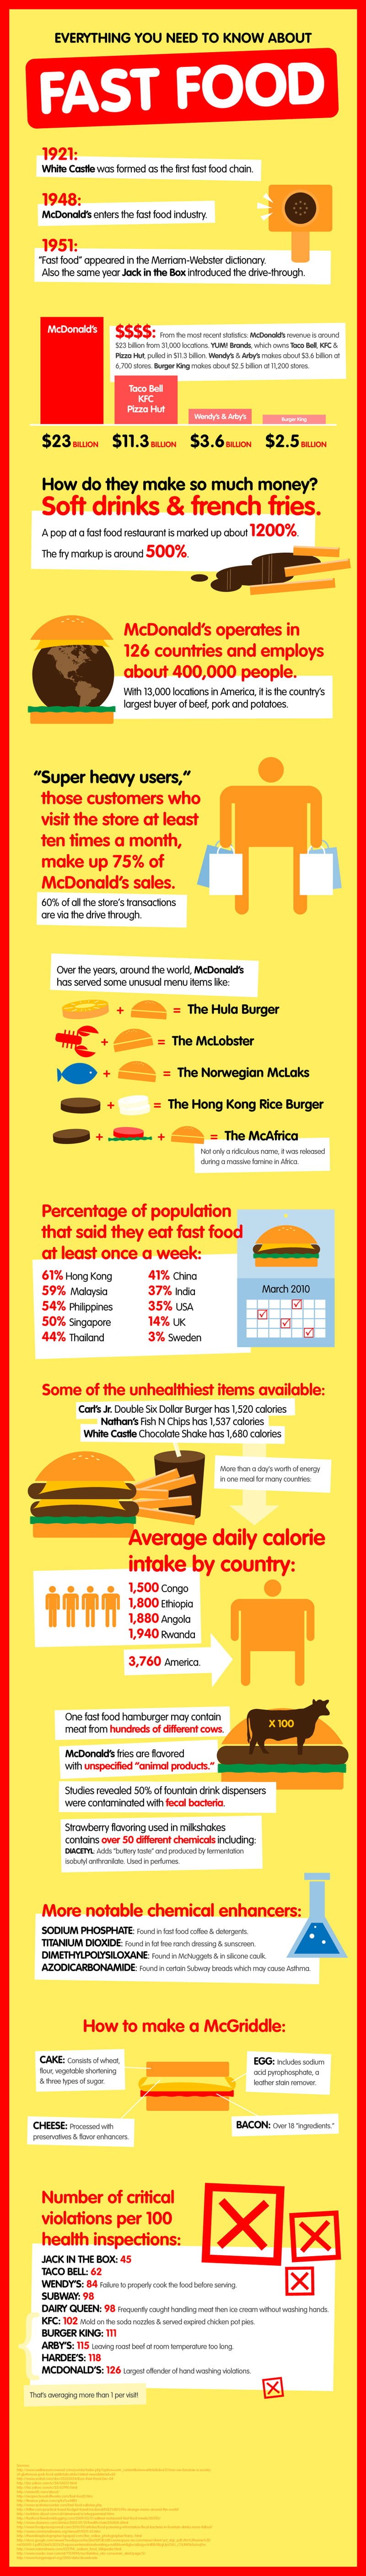 Everything You Need to Know About Fast Food Infographic